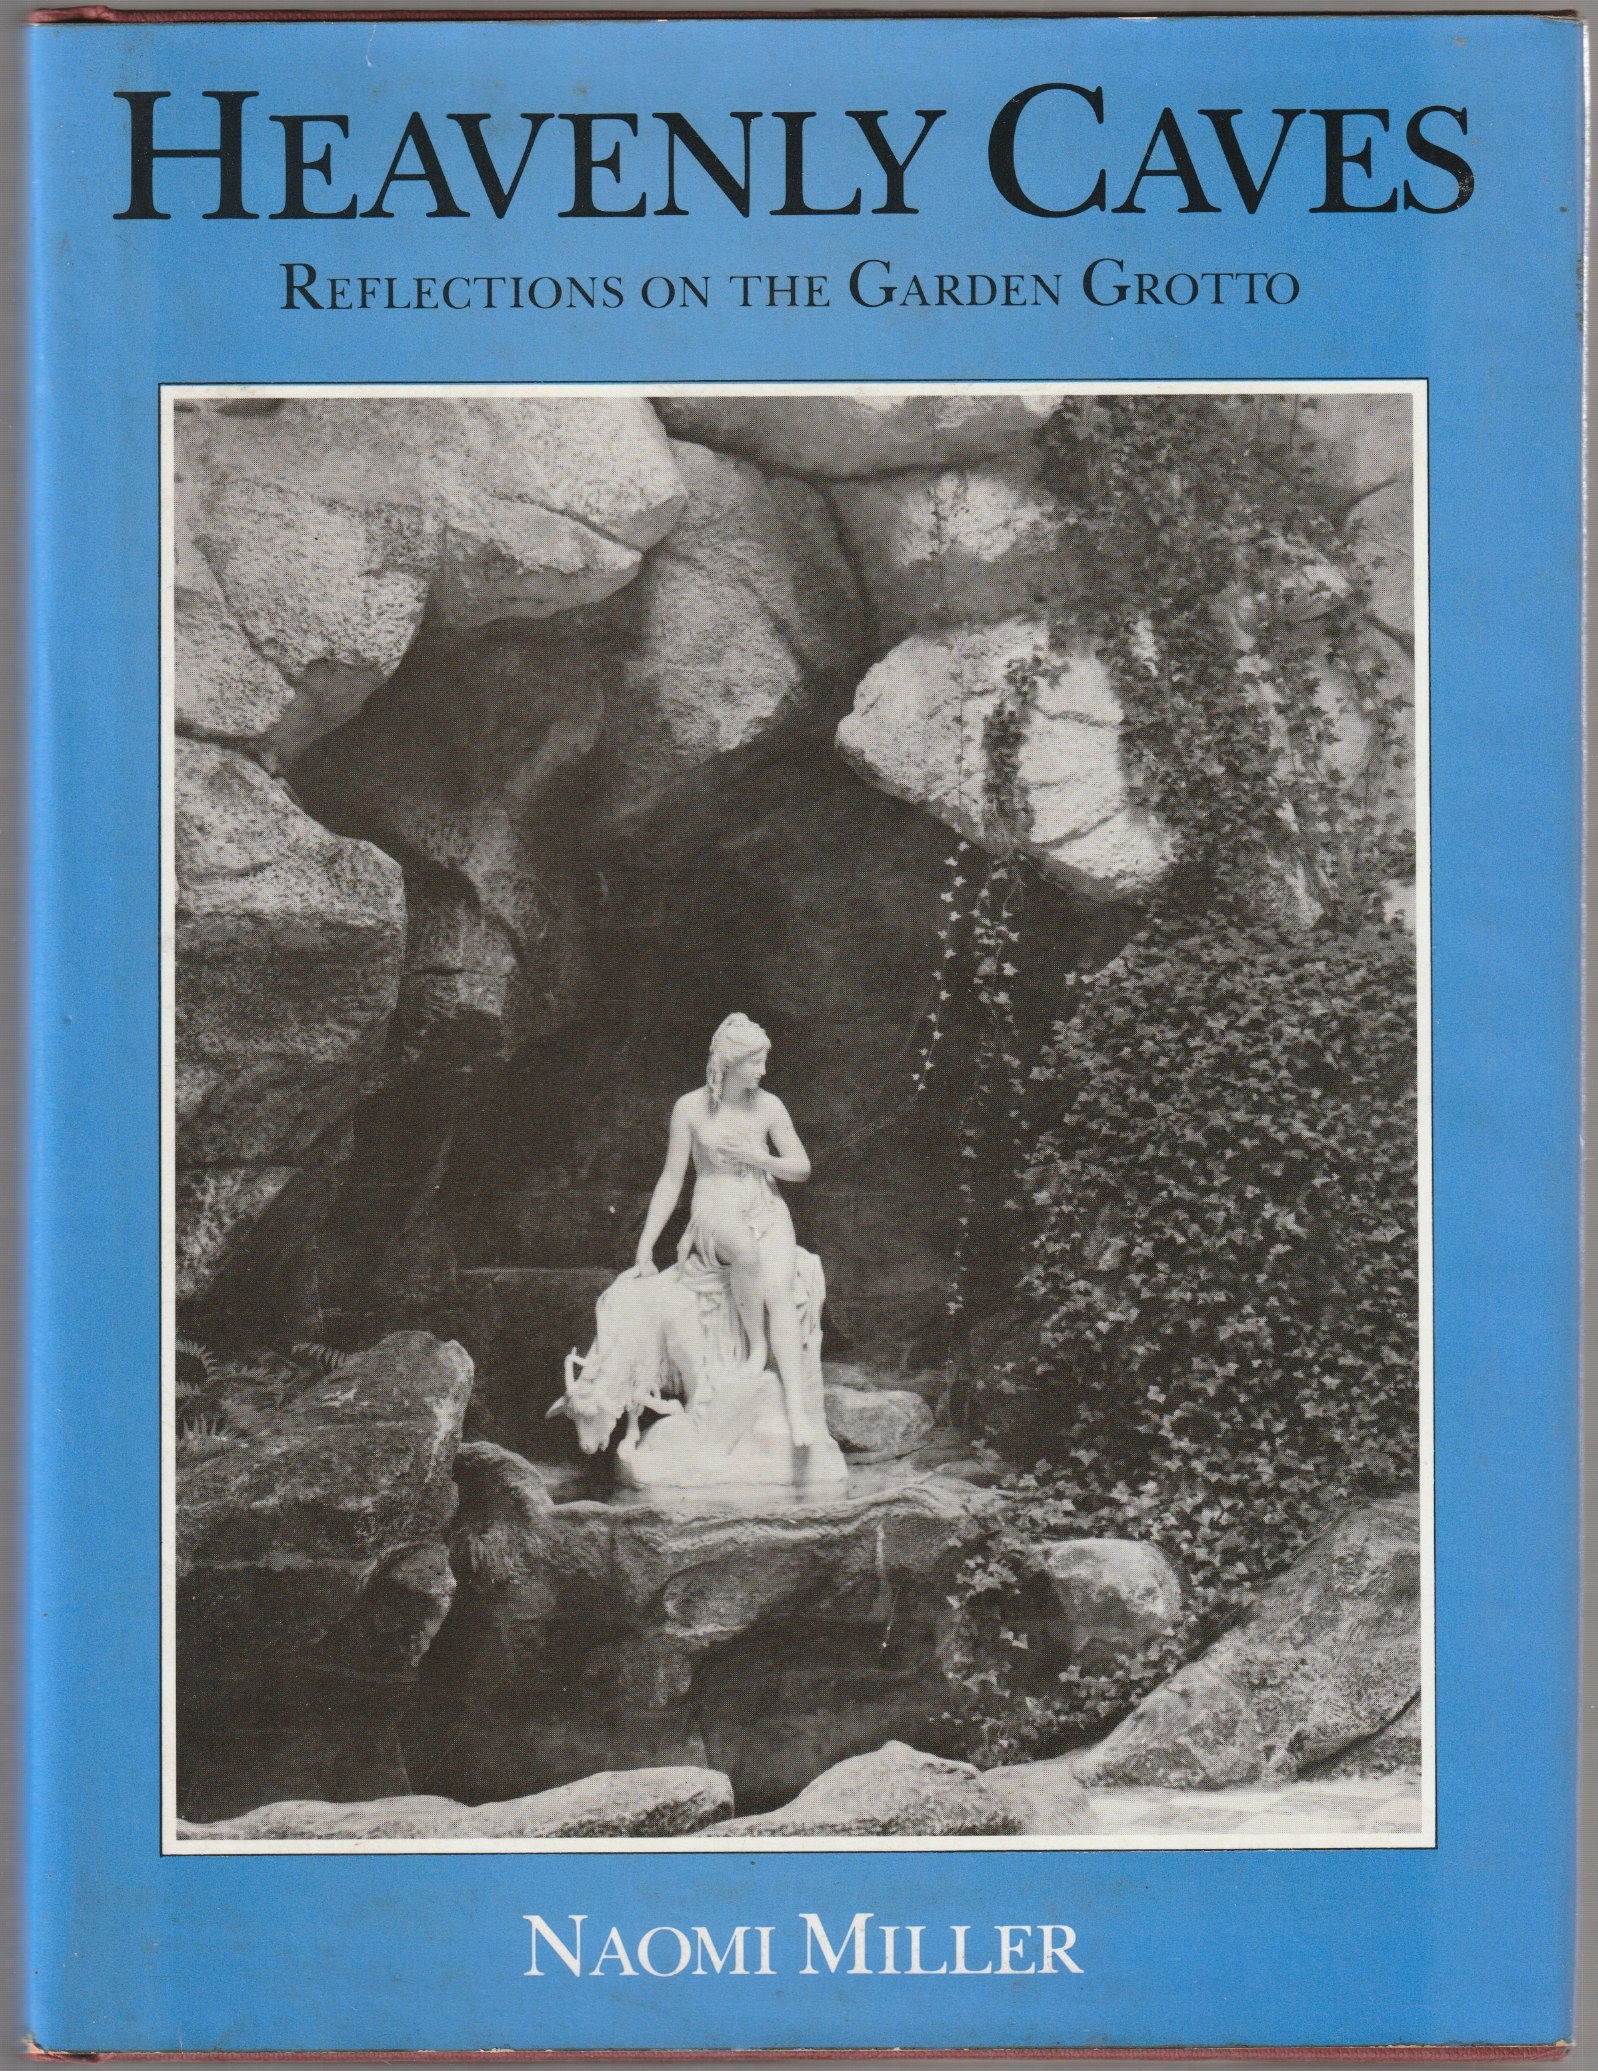 Heavenly caves : reflections on the garden grotto